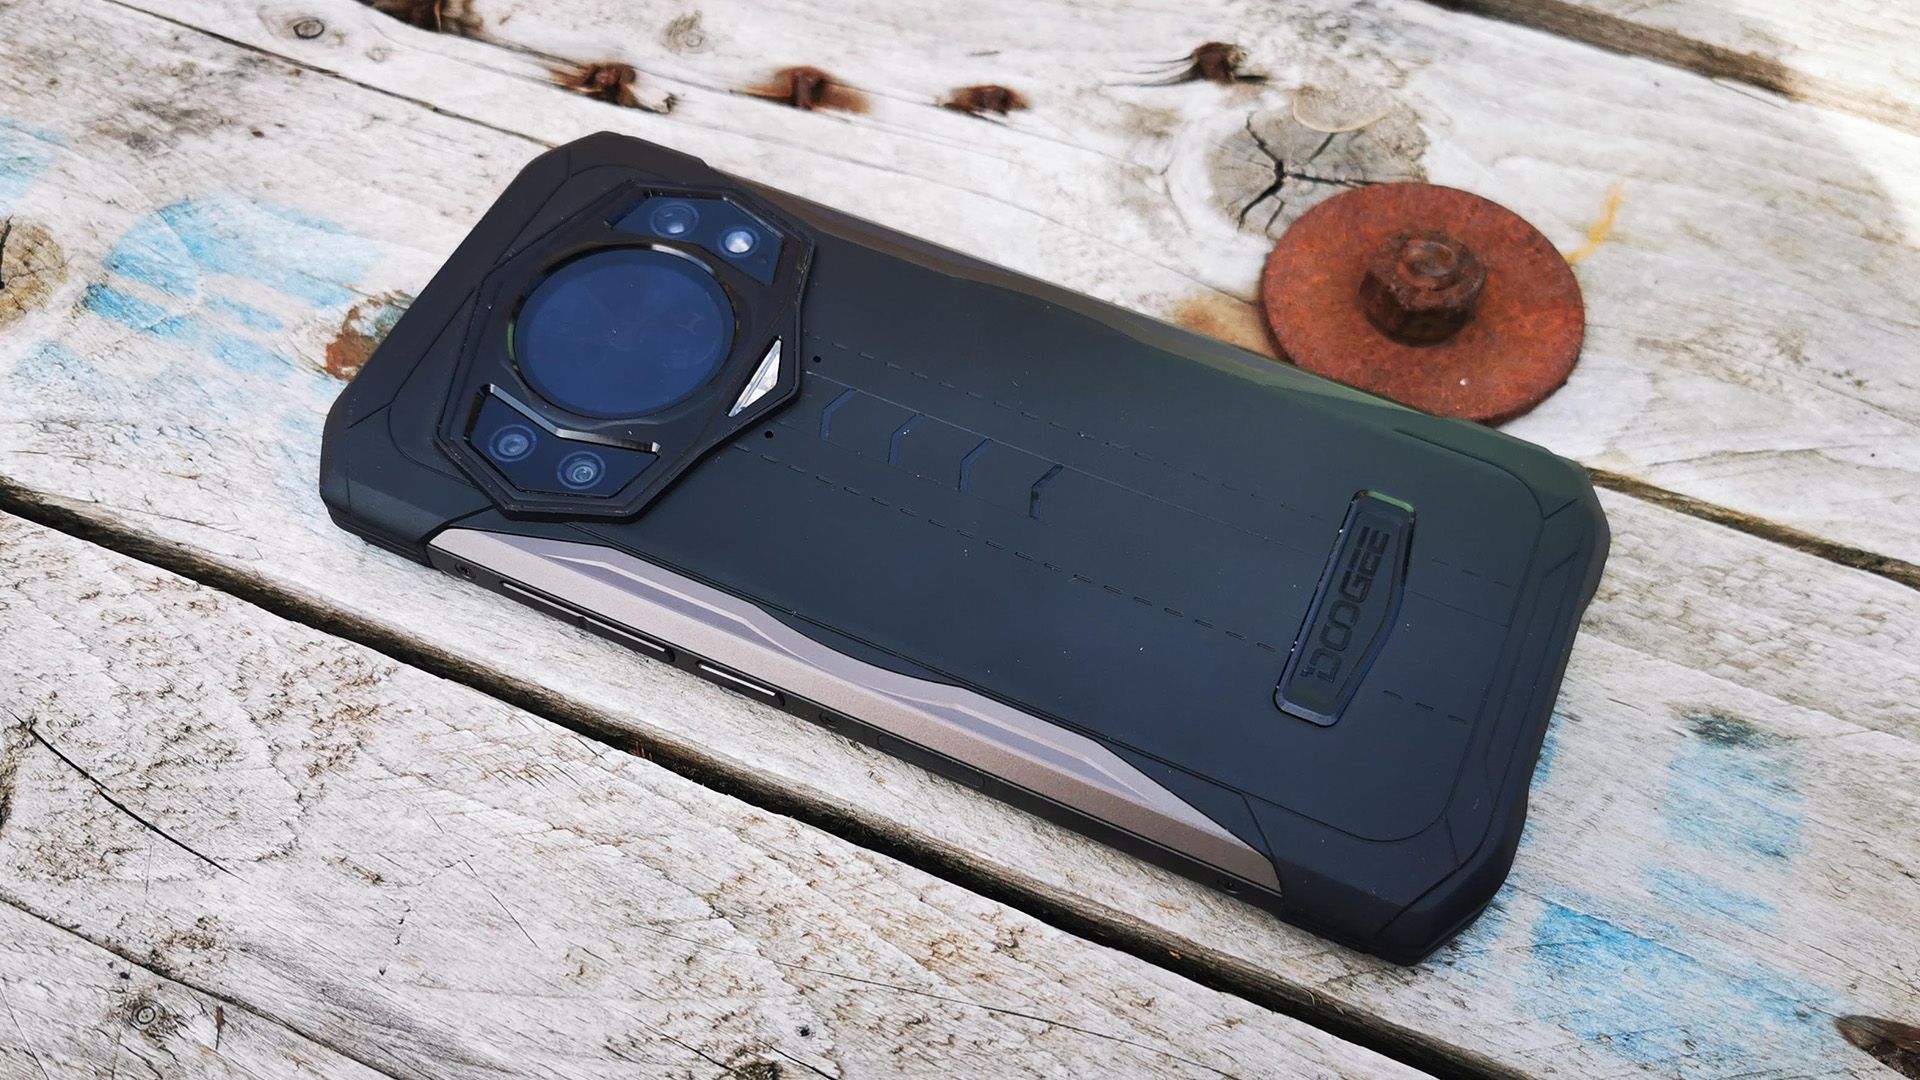 TECH TALK: Doogee S98 Pro – a rugged phone with oodles of memory, battery  power and gadgets galore